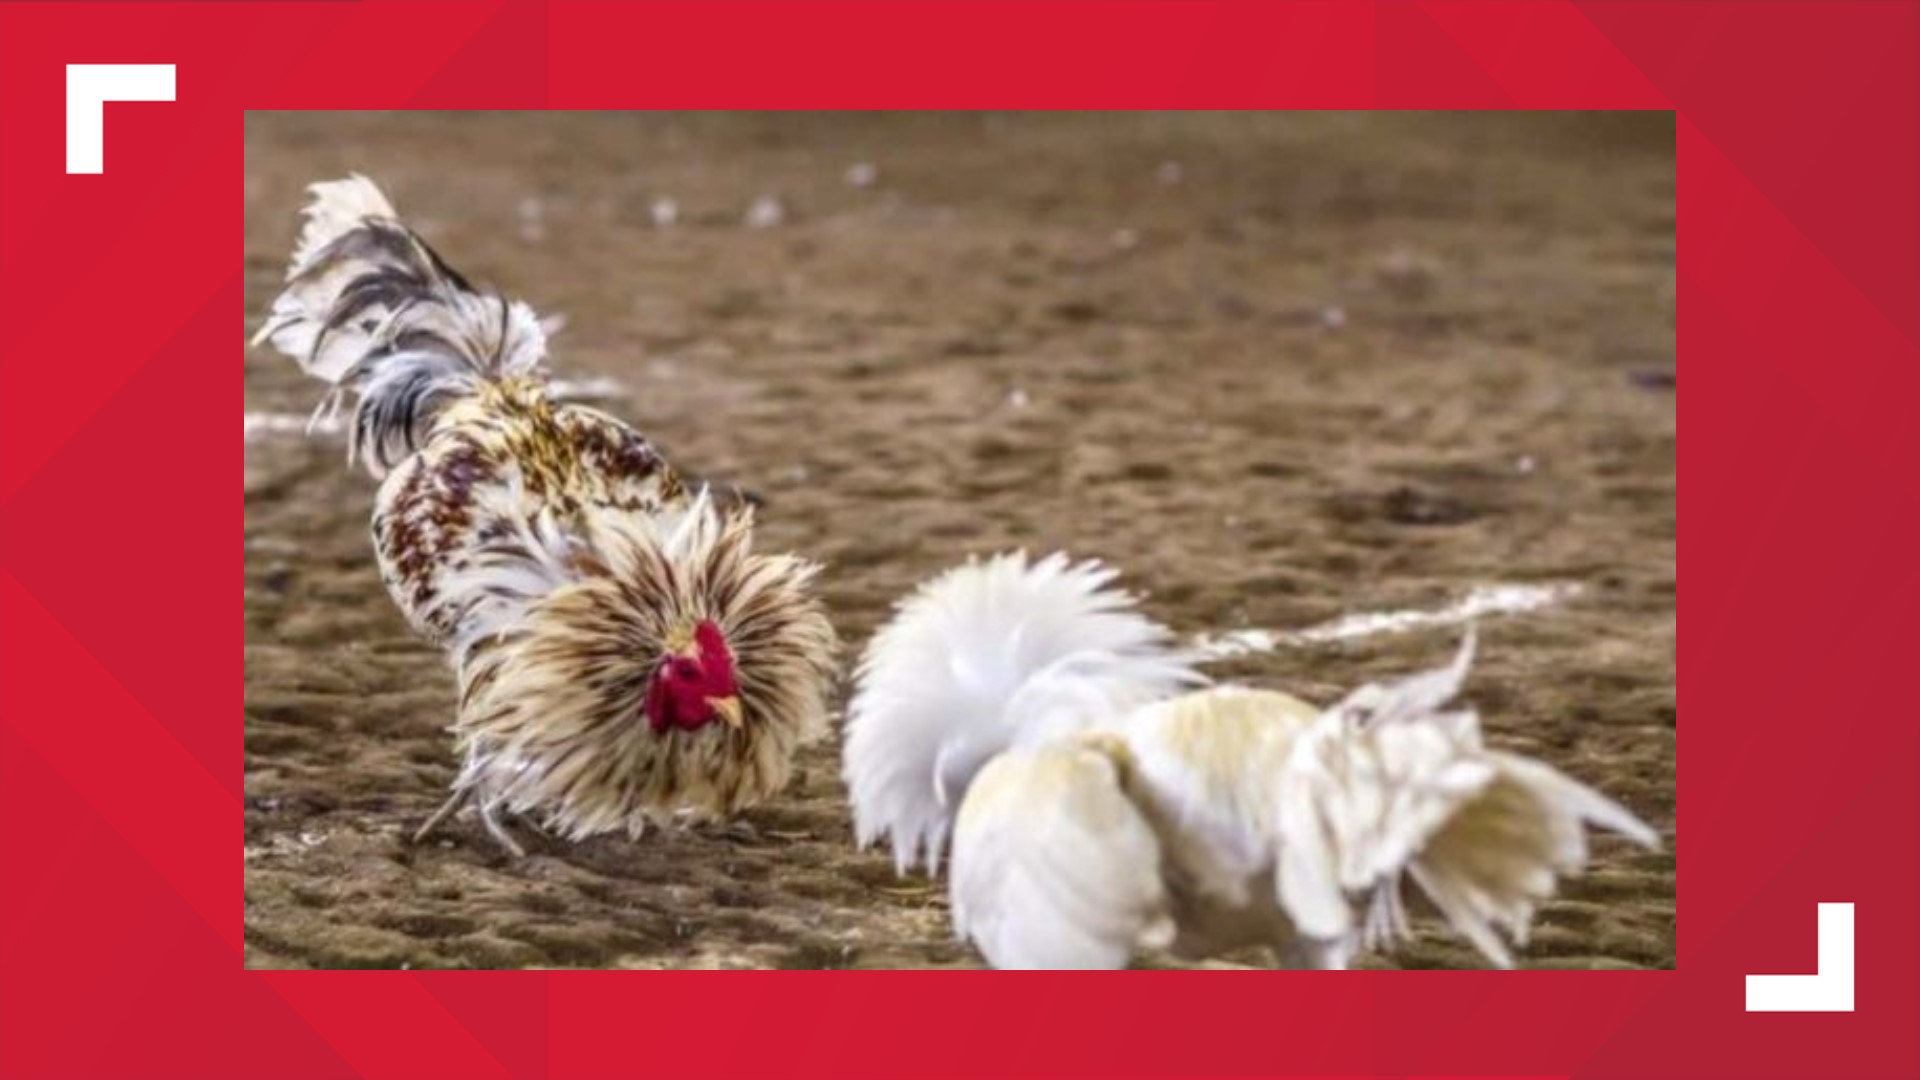 Alabama hasn't changed its penalties for cockfighting since 1896.